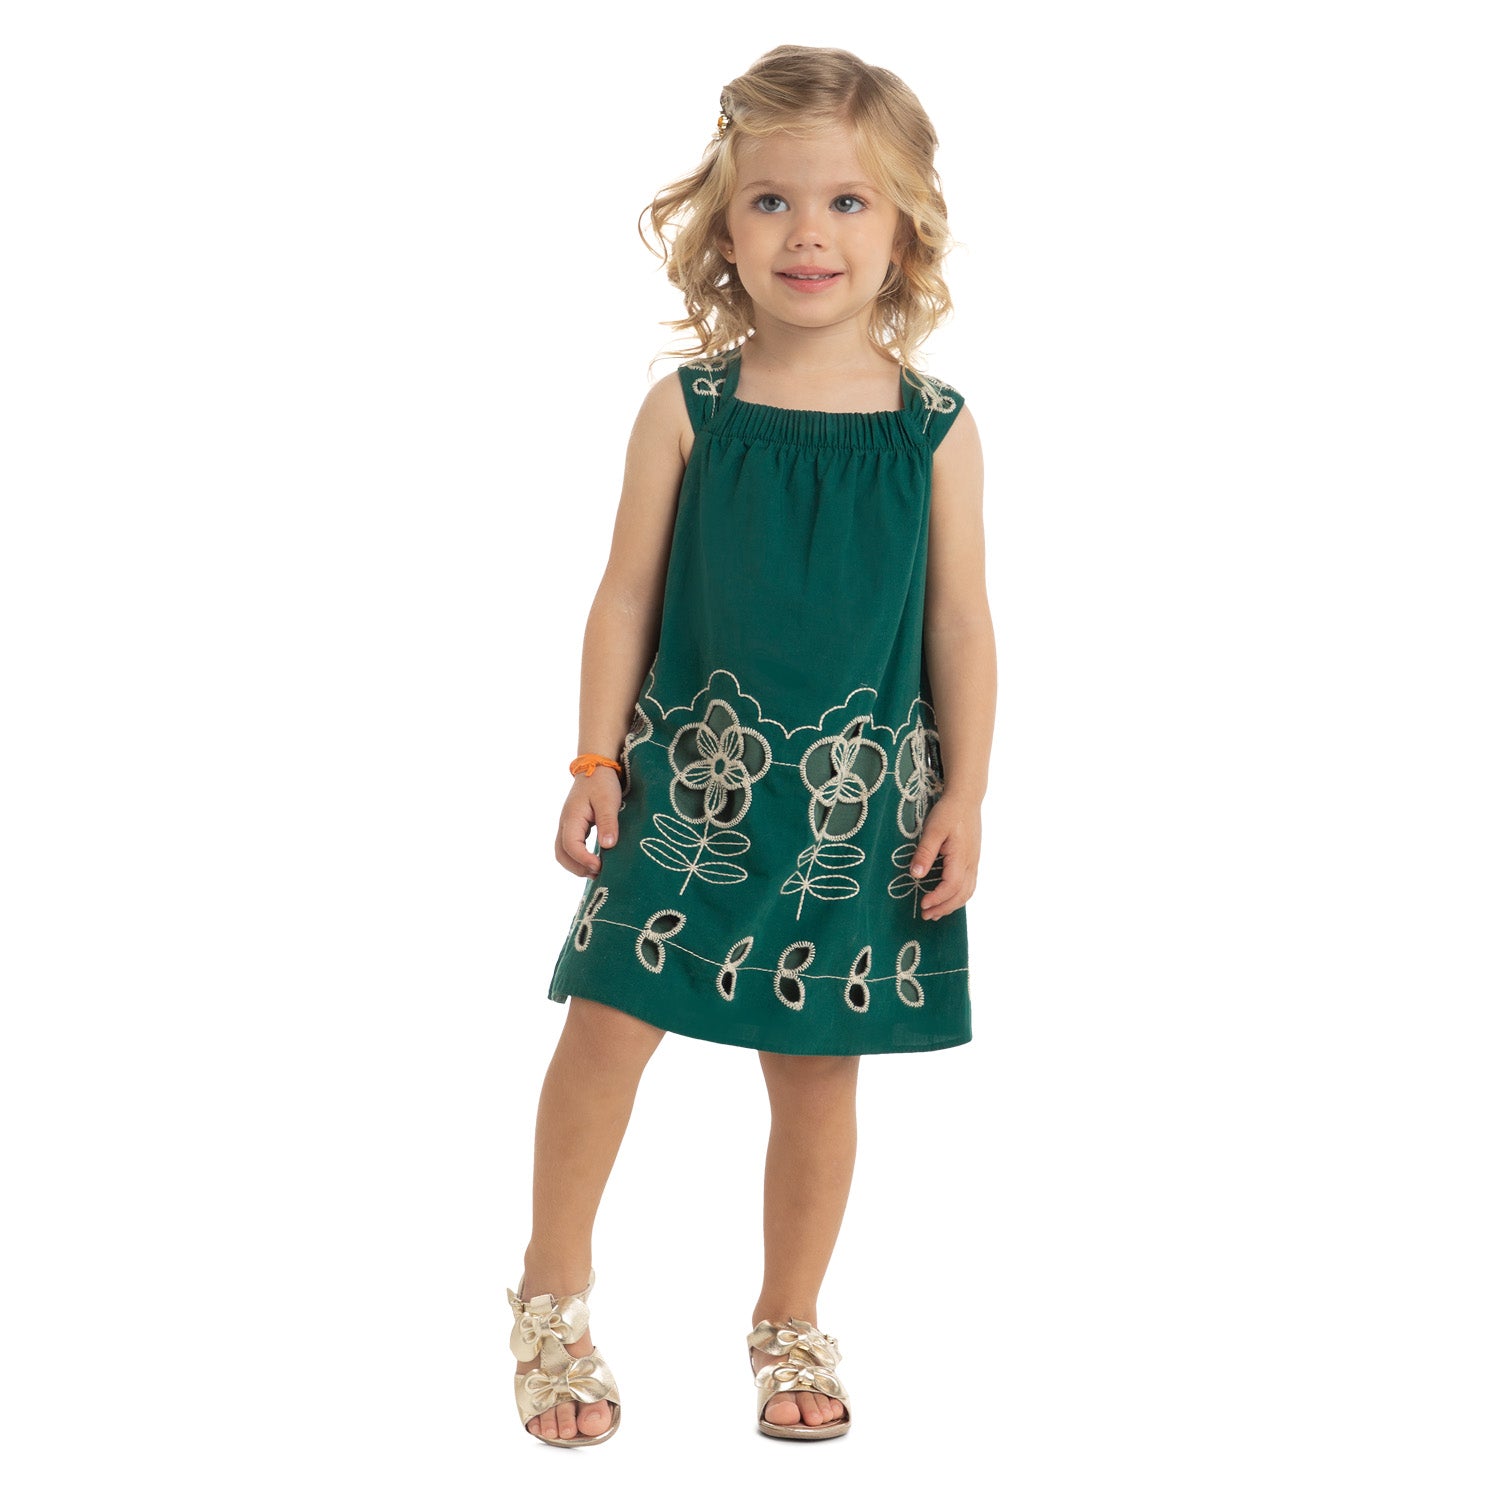 Emerald Ribbon Embroidered Dress